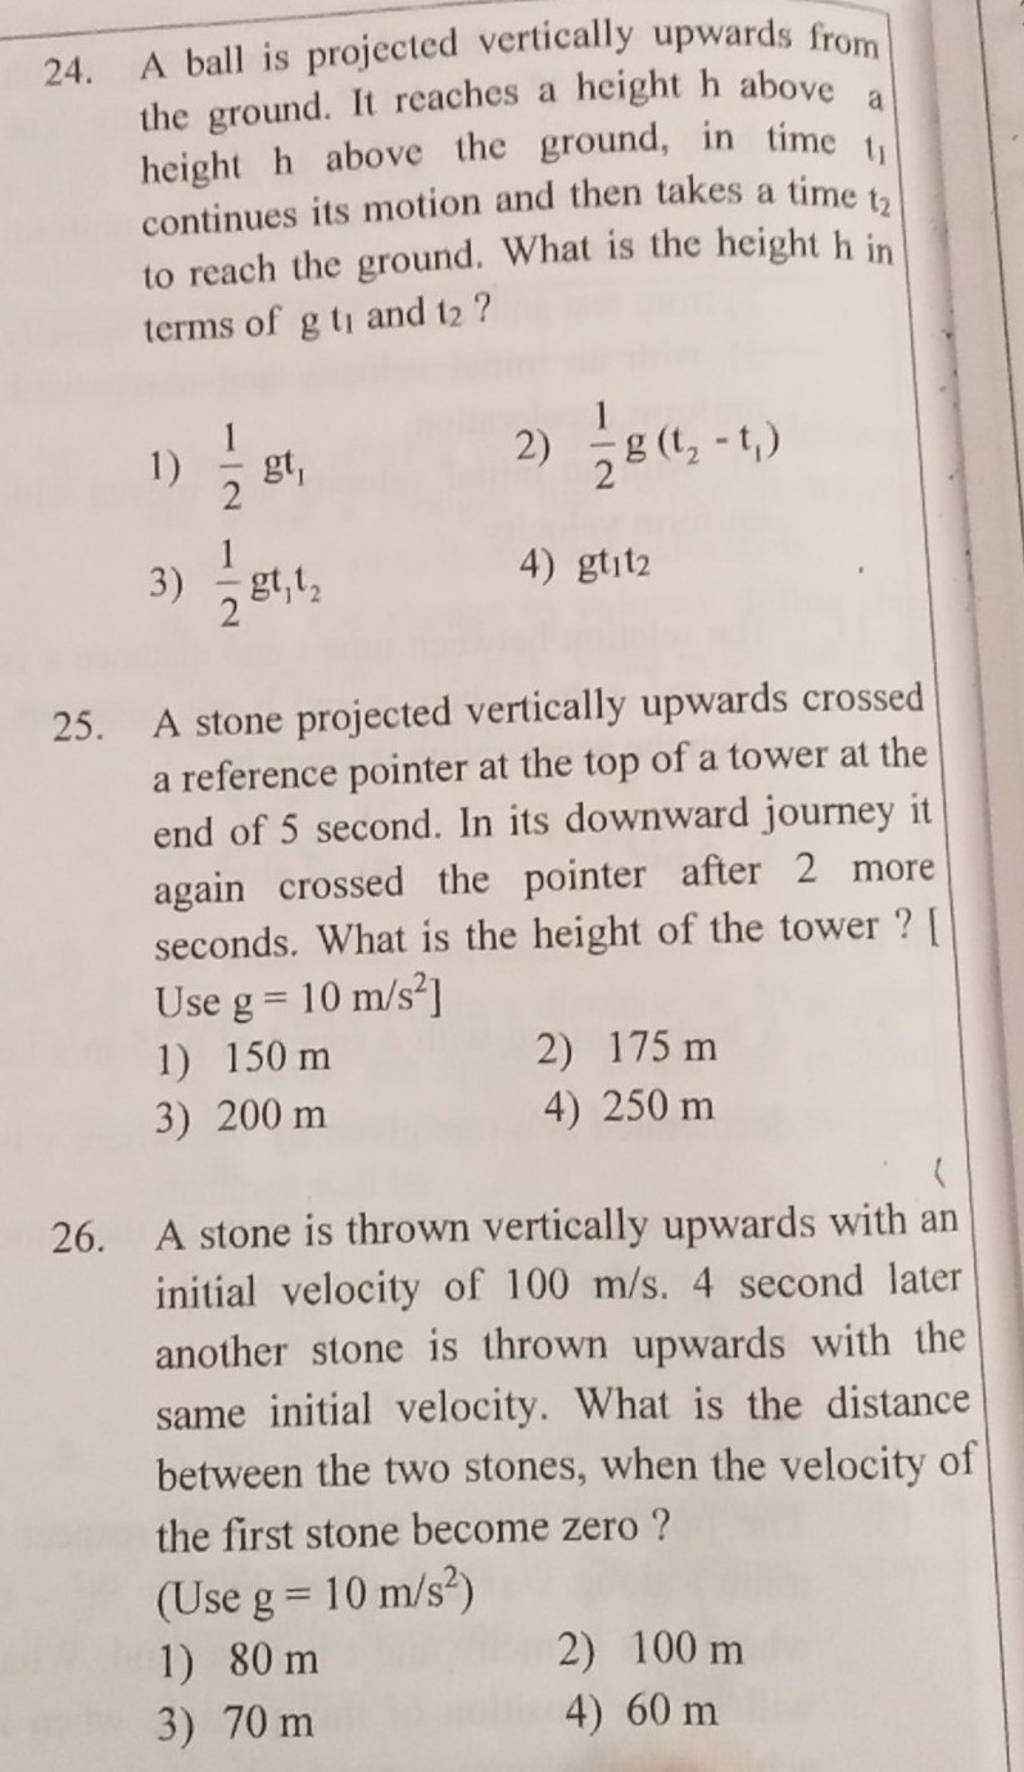 A stone projected vertically upwards crossed a reference pointer at th